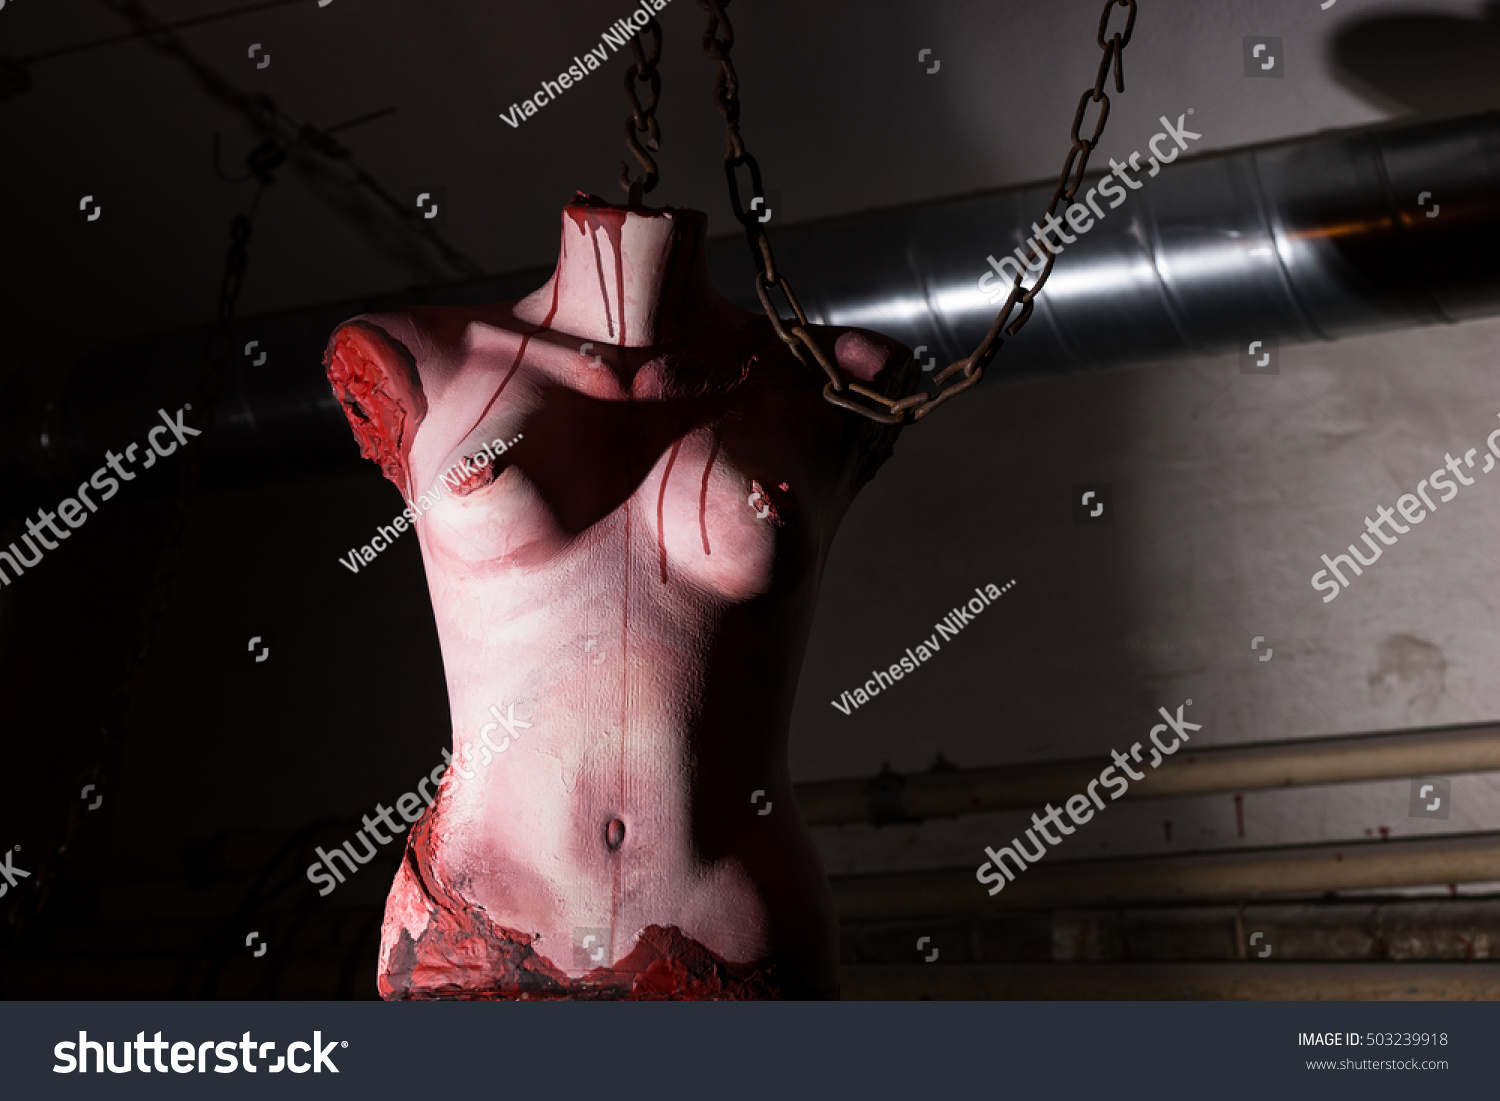 Naked girls dismembered Dismembered Female Torso Hanging Chains Basement Stock Photo Edit Now 503239918